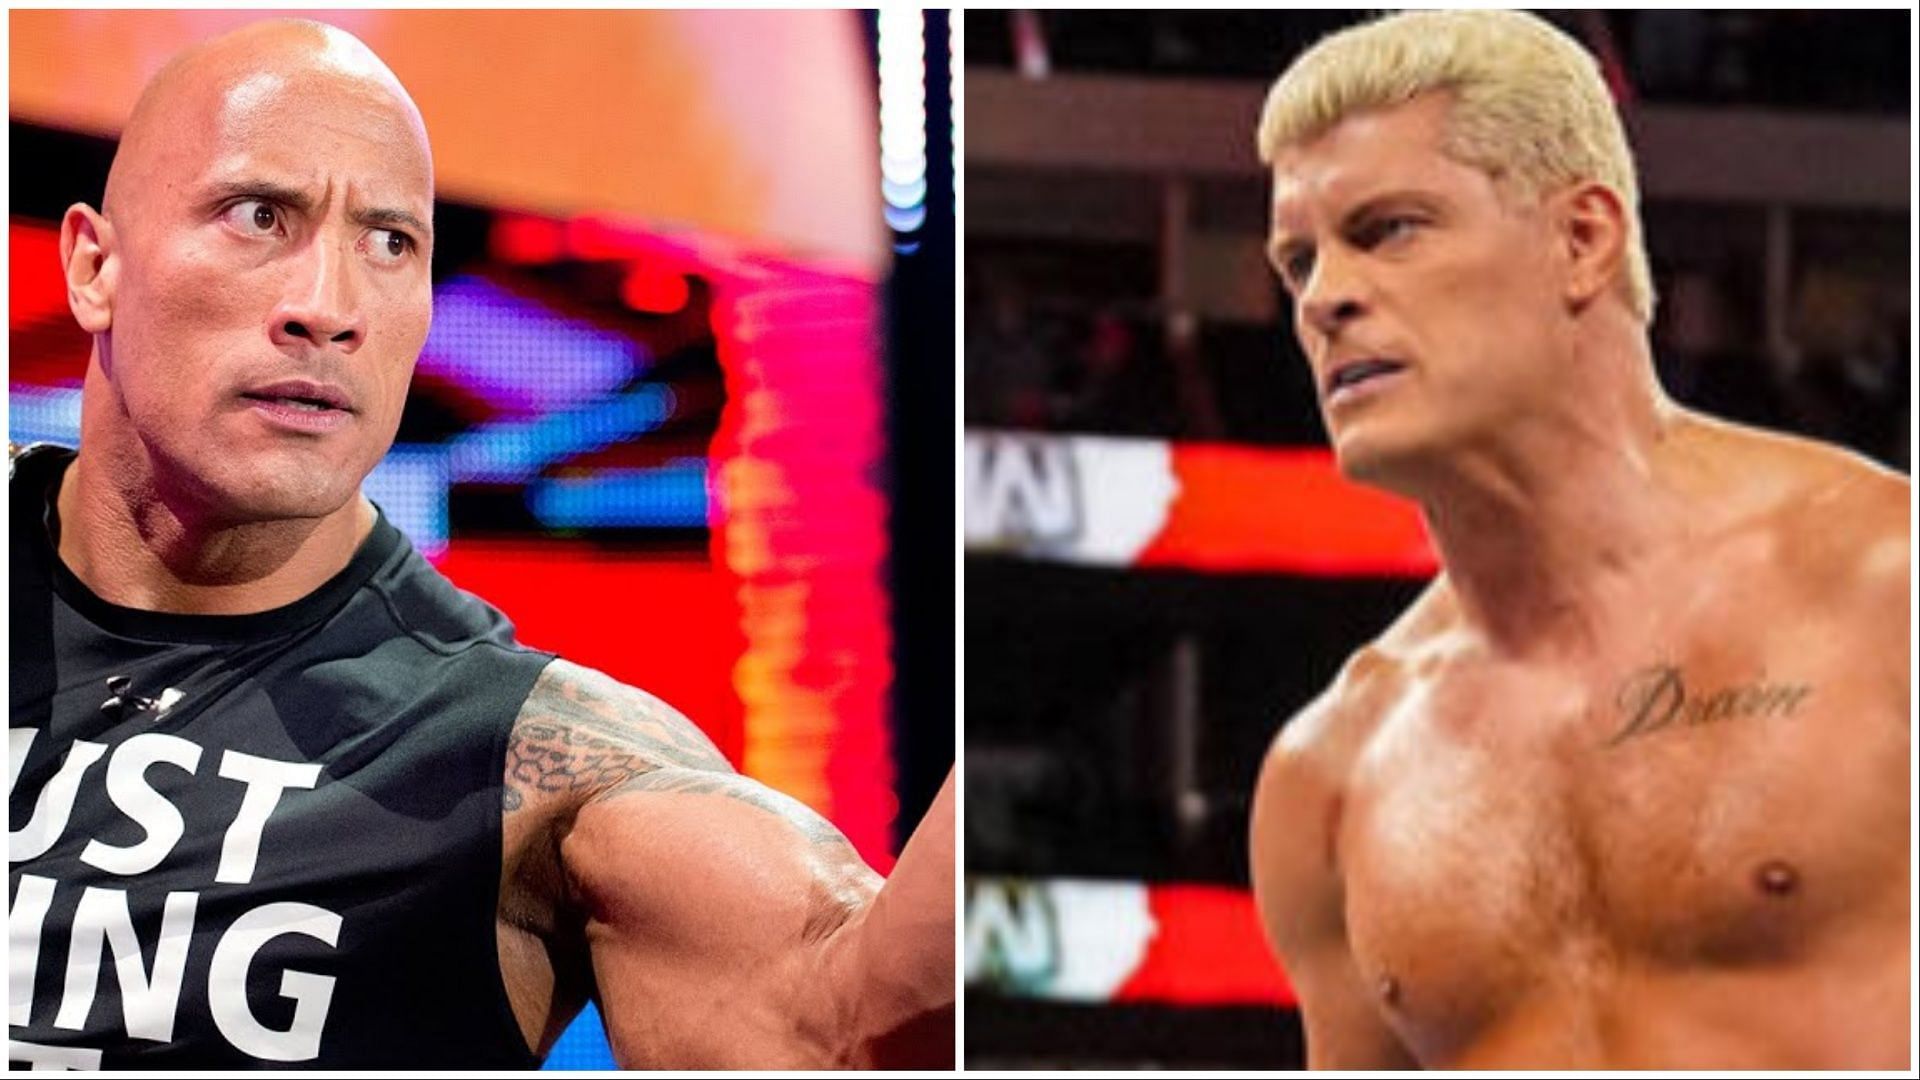 WWE Superstars The Rock and Cody Rhodes